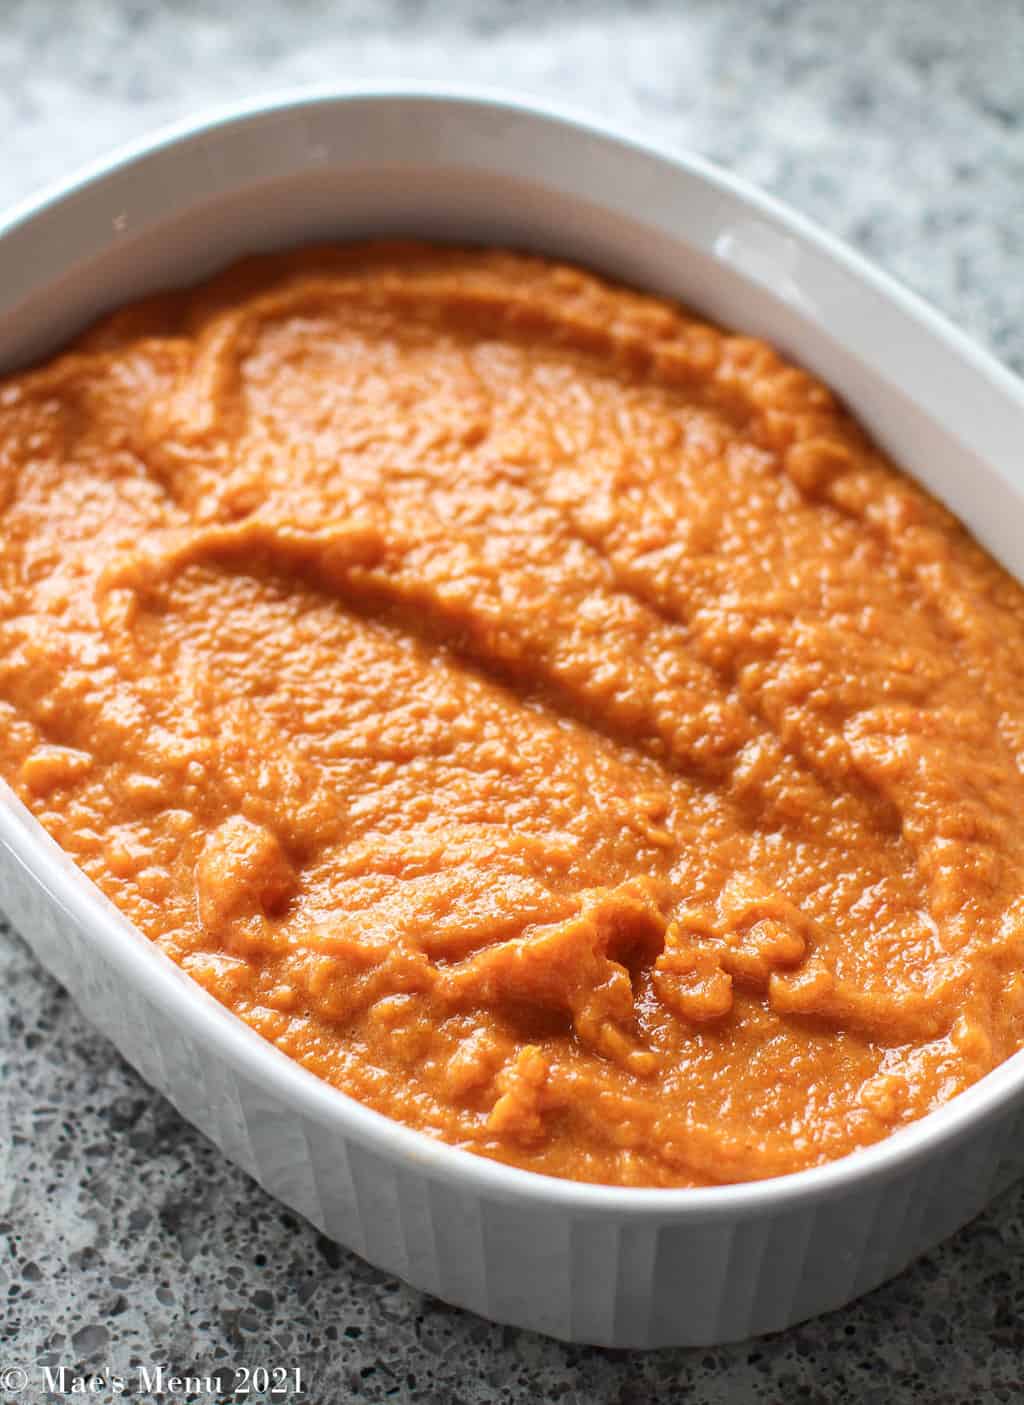 Sweet potato souffle in a baking dish ready to go in the oven